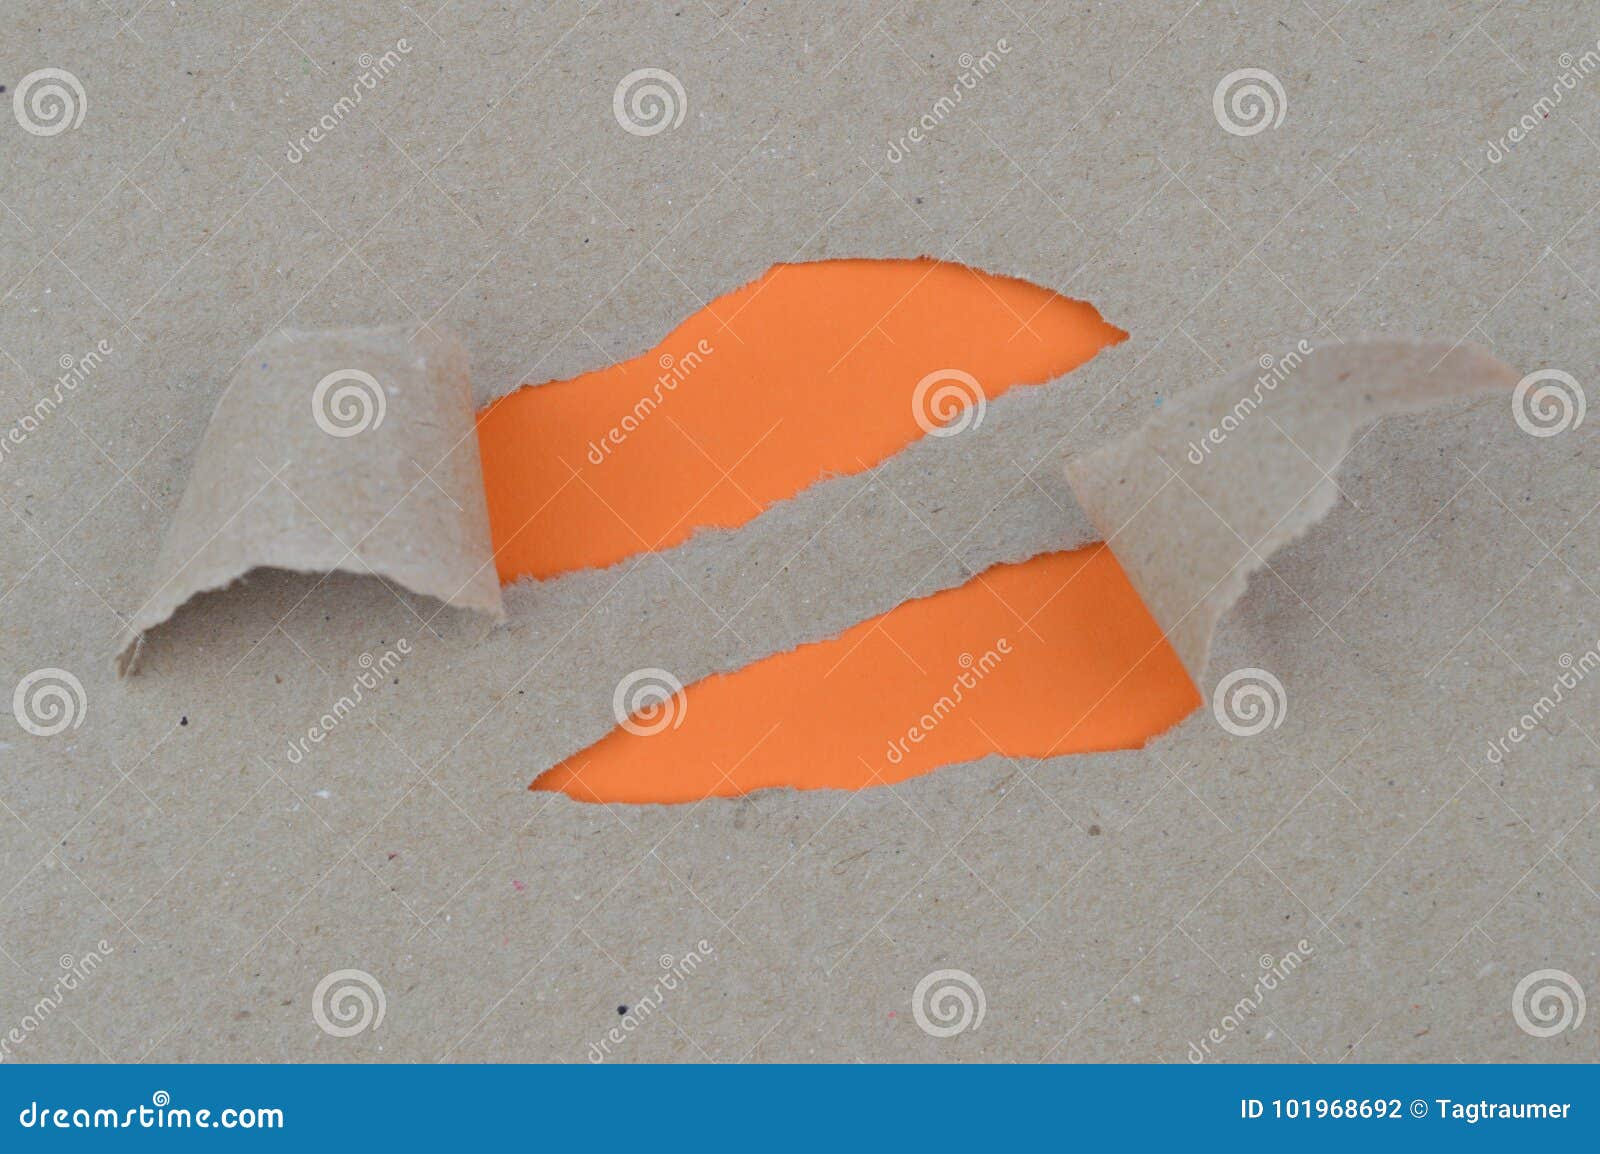 ripped paper revealing orange space for words